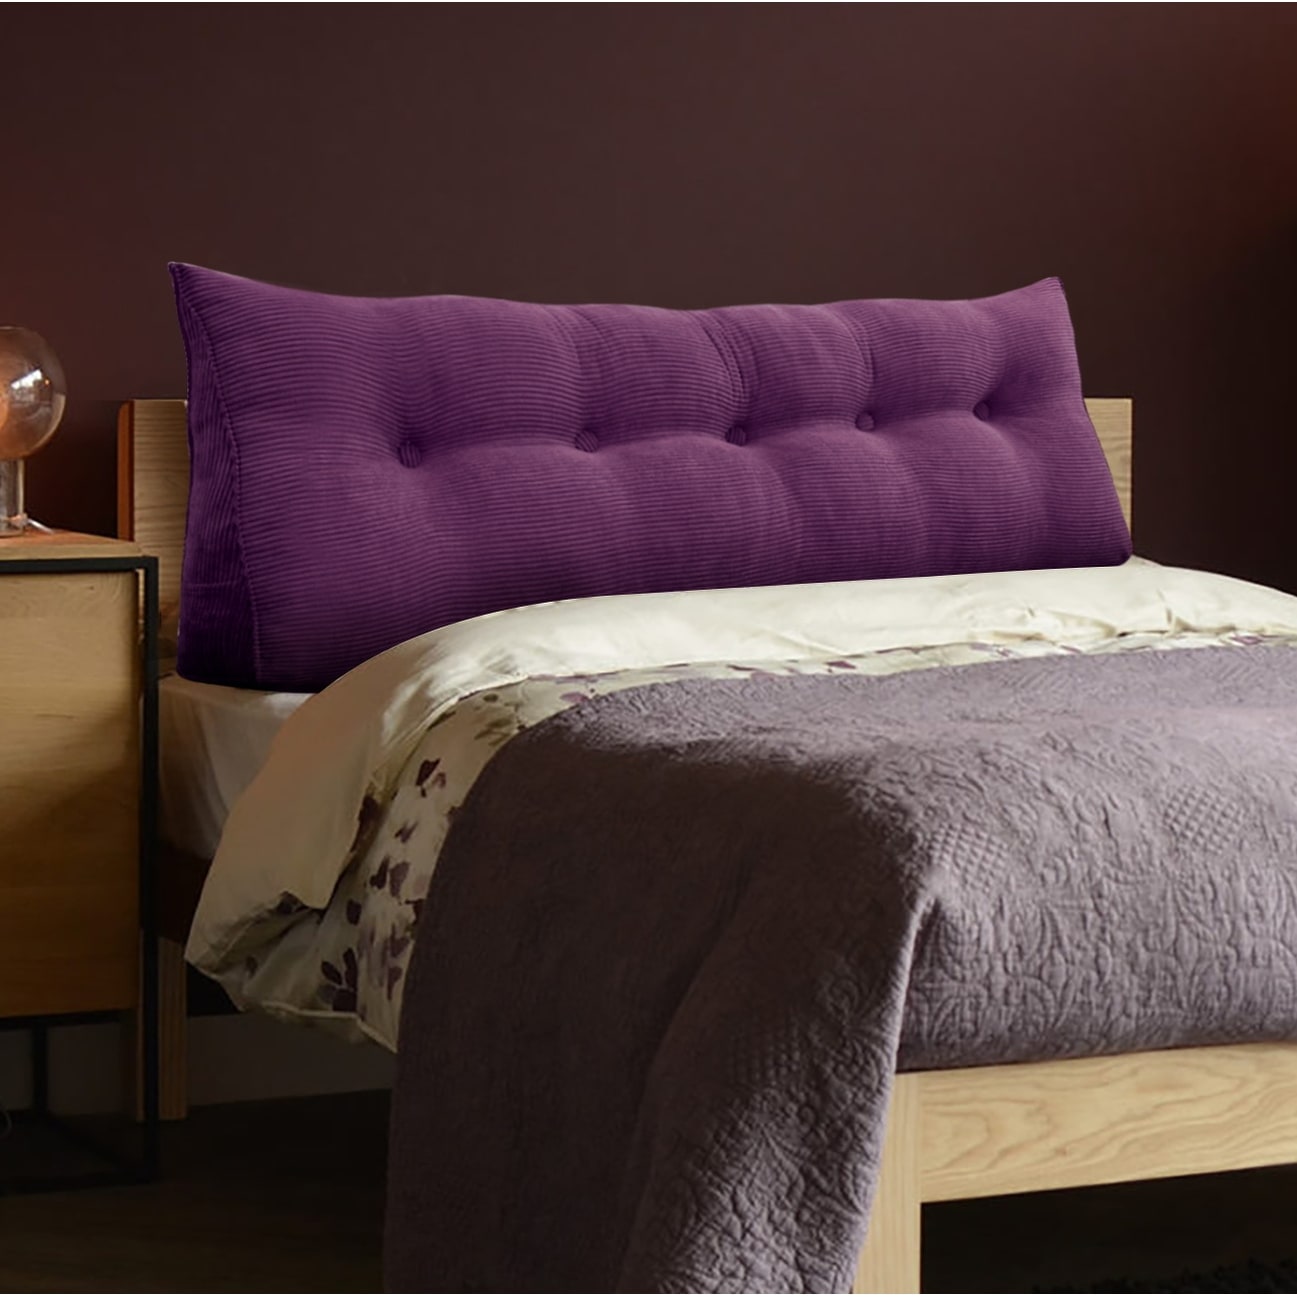 https://ak1.ostkcdn.com/images/products/is/images/direct/1d6f5e875cac4f0c9cc2bbc680f29d710a073f47/WOWMAX-Headboard-Reading-Wedge-Backrest-Bed-Support-Pillow.jpg